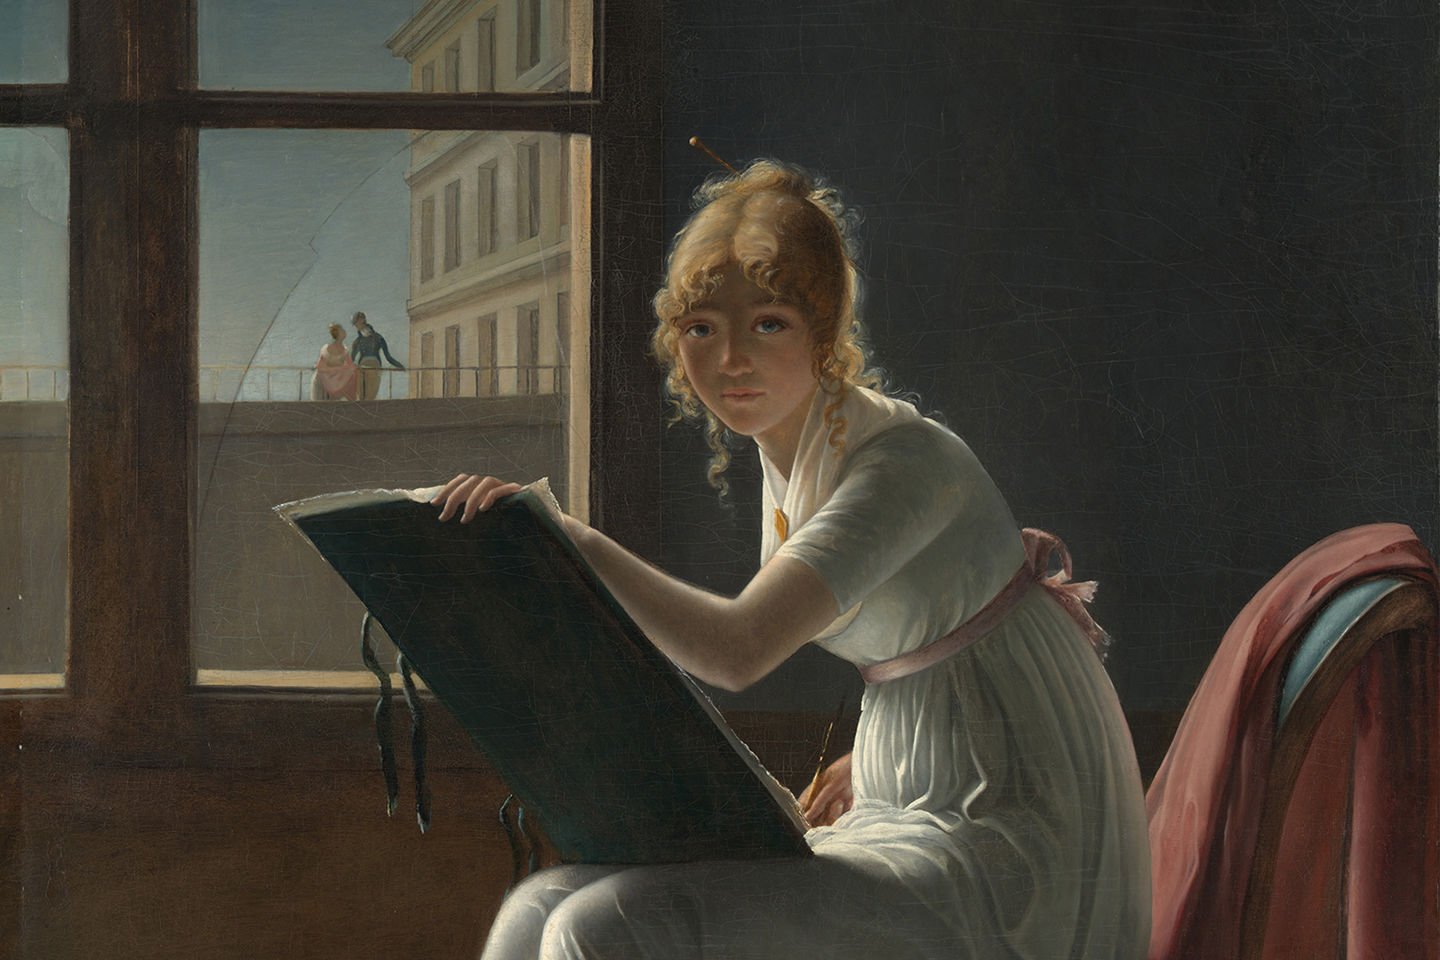 Detail of Marie Denise Villers’s portrait of a young woman artist seated and sketching at her easel.